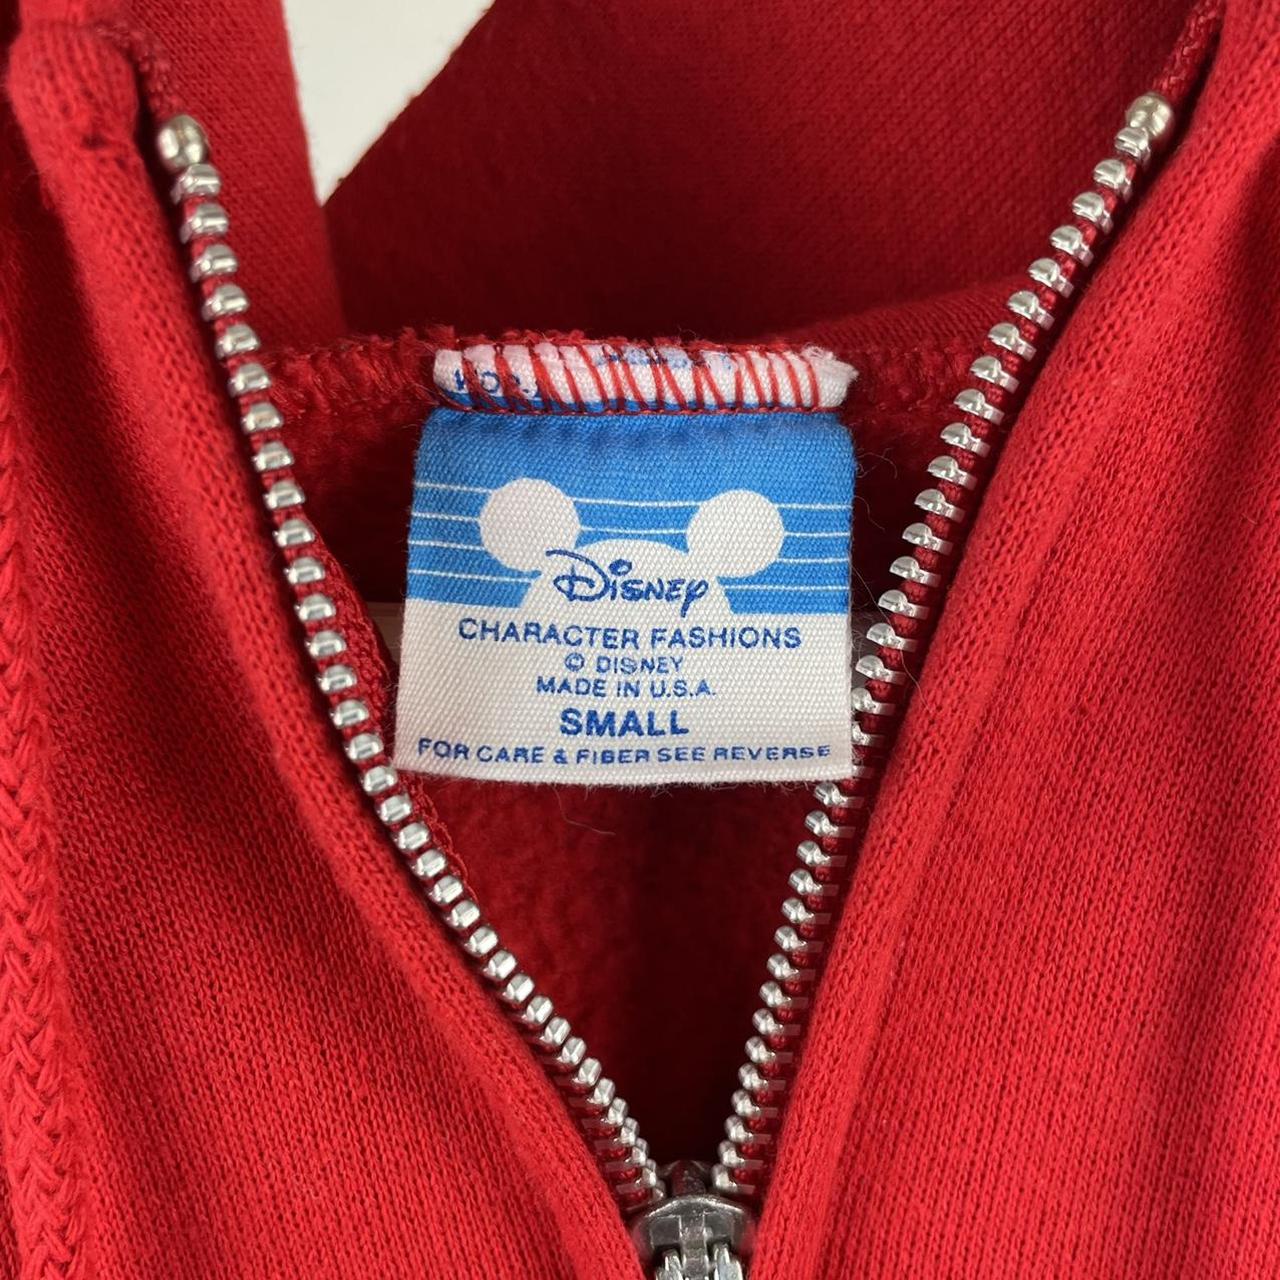 Product Image 2 - Mickey Mouse Disney Zip-up Hoodie

***